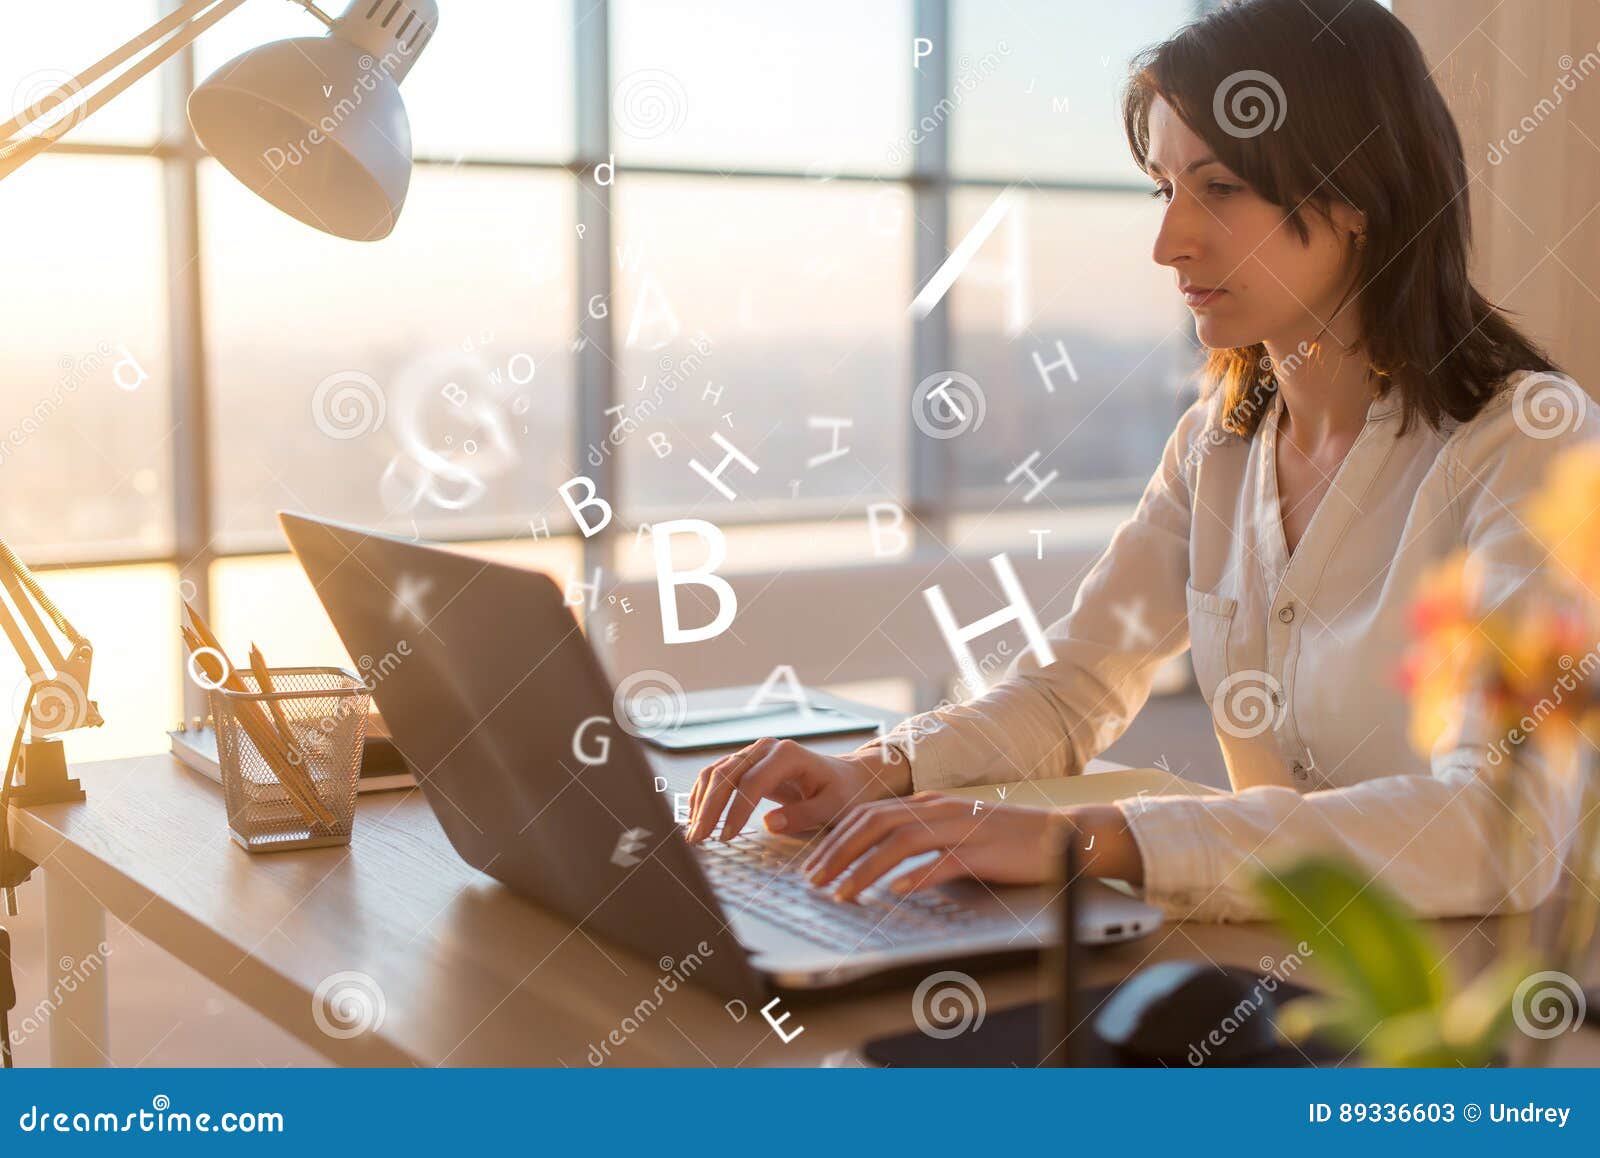 woman at workplace using laptop working, typing, surfing the internet